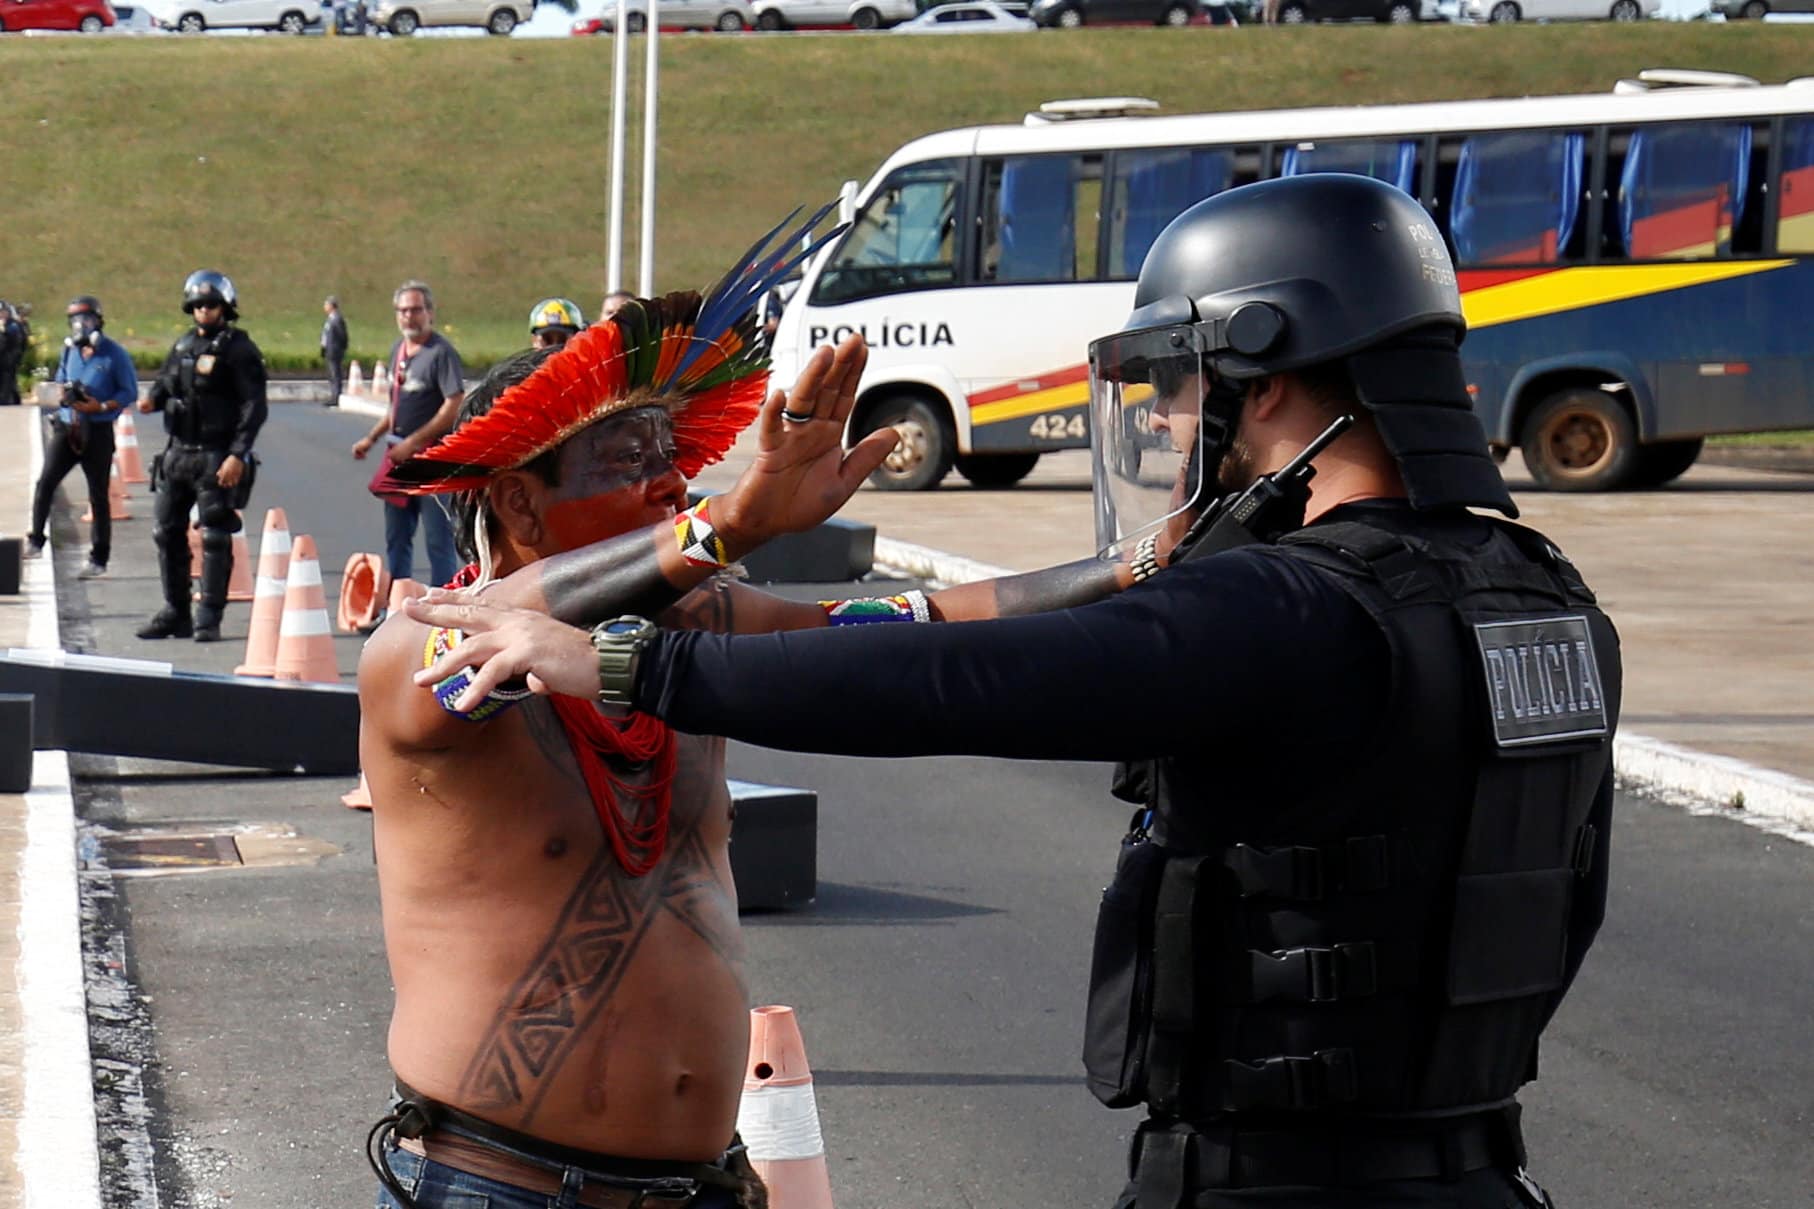 Brazilian Indians take part in a demonstration against the violation of indigenous people's rights, in Brasilia